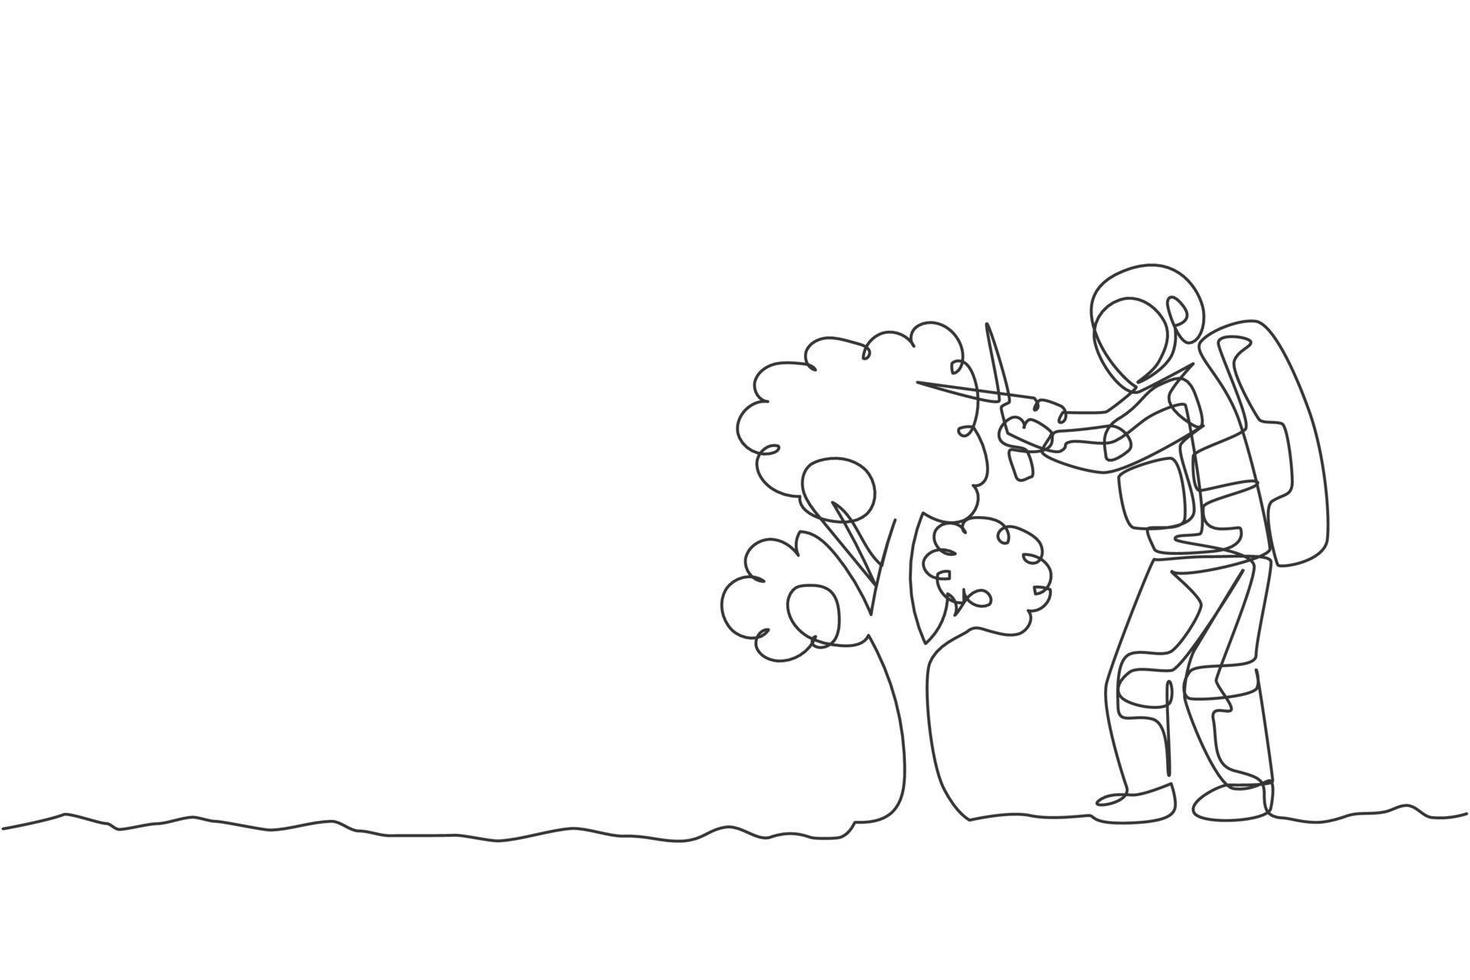 One continuous line drawing of spaceman cutting tree leaf using gardening scissor in moon surface. Deep space gardening astronaut concept. Dynamic single line draw design graphic vector illustration